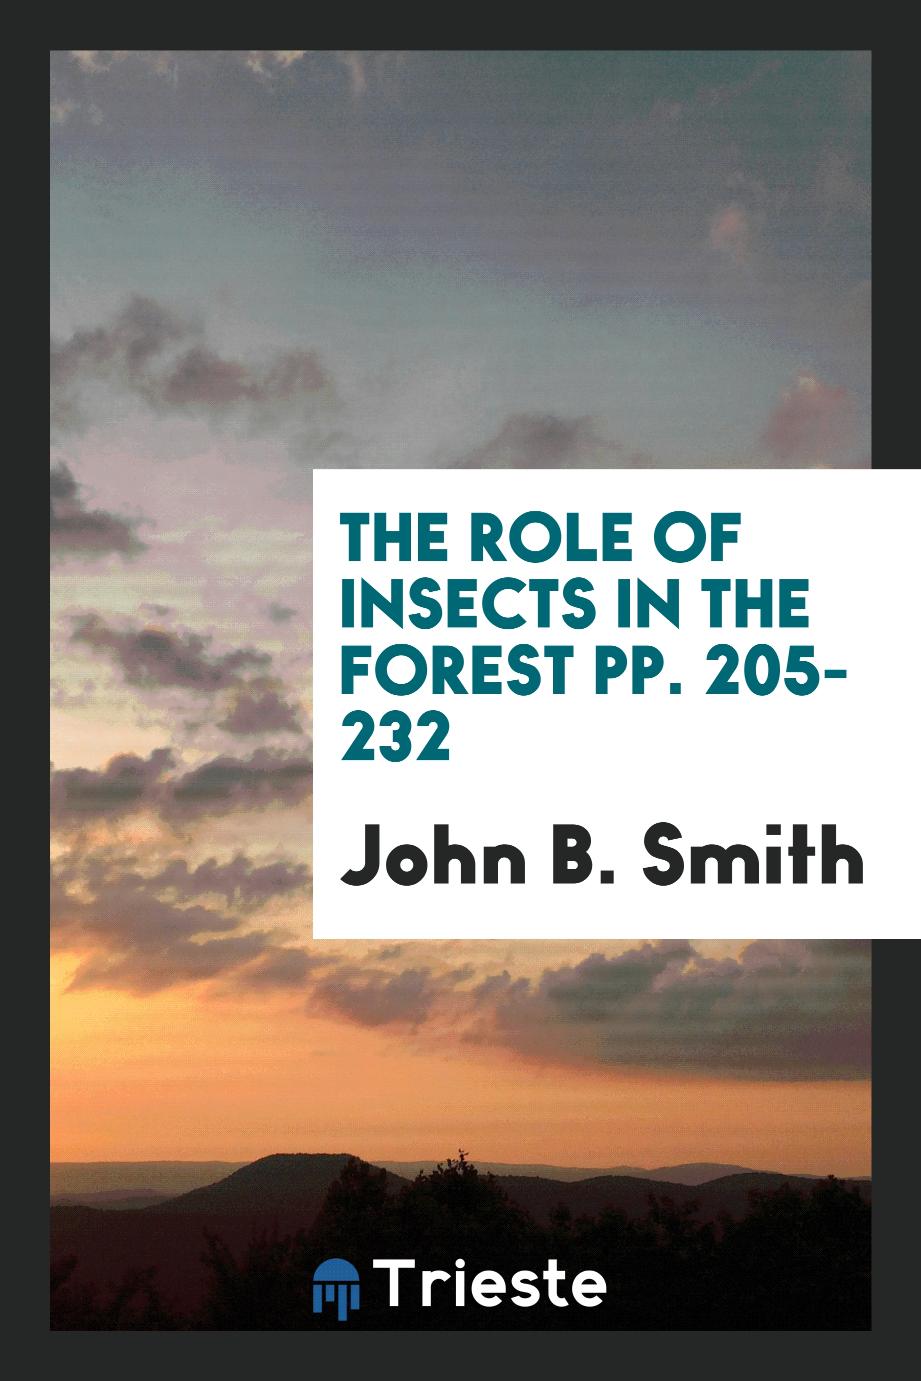 The role of insects in the forest pp. 205-232